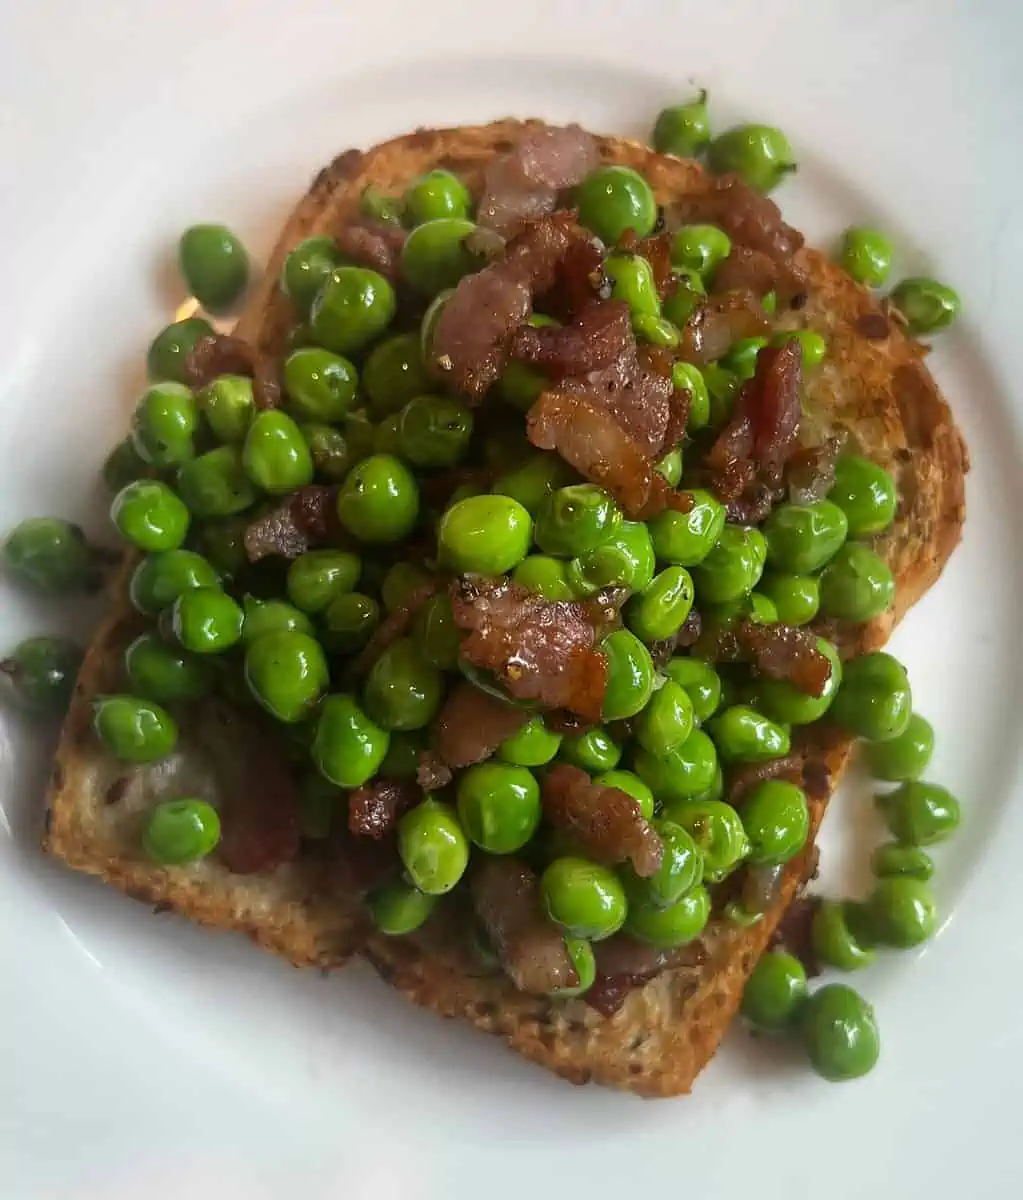 shelled peas and cooked bacon on toasted bread